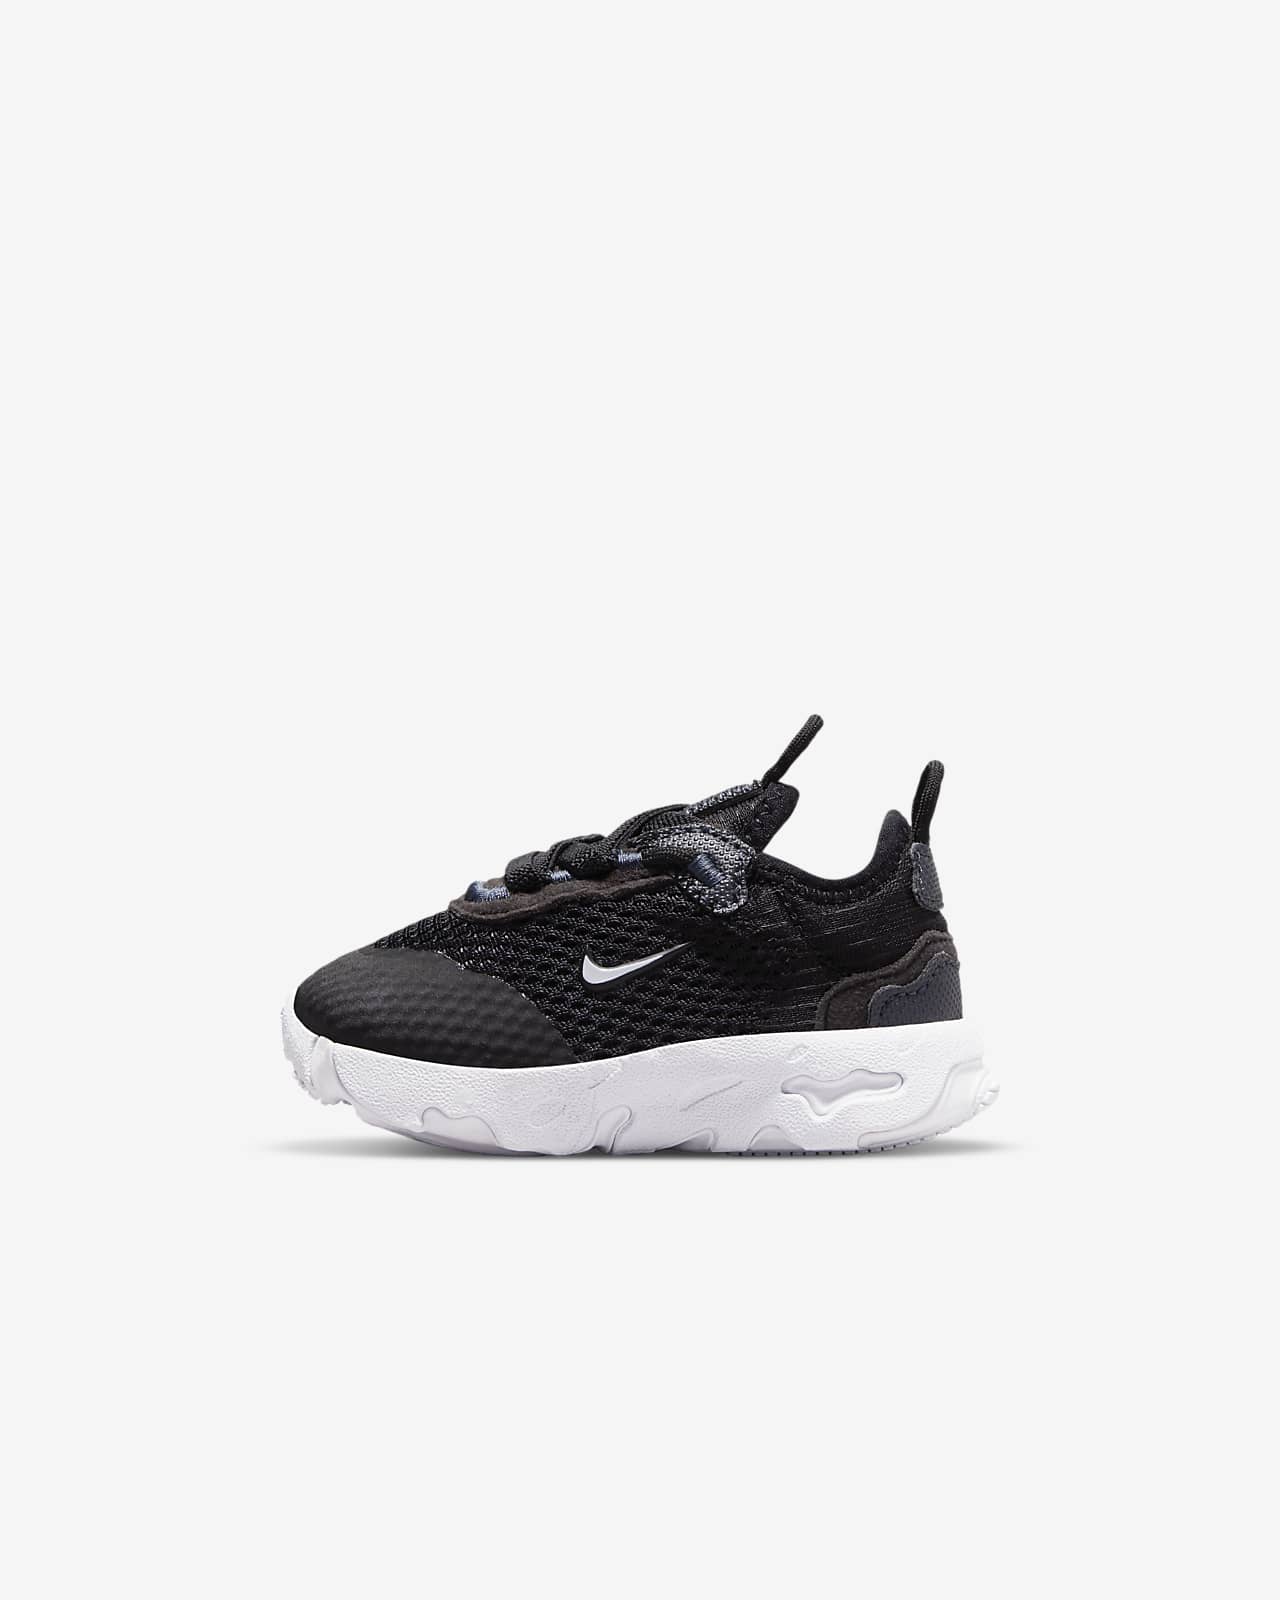 Nike RT Live Baby/Toddler Shoes